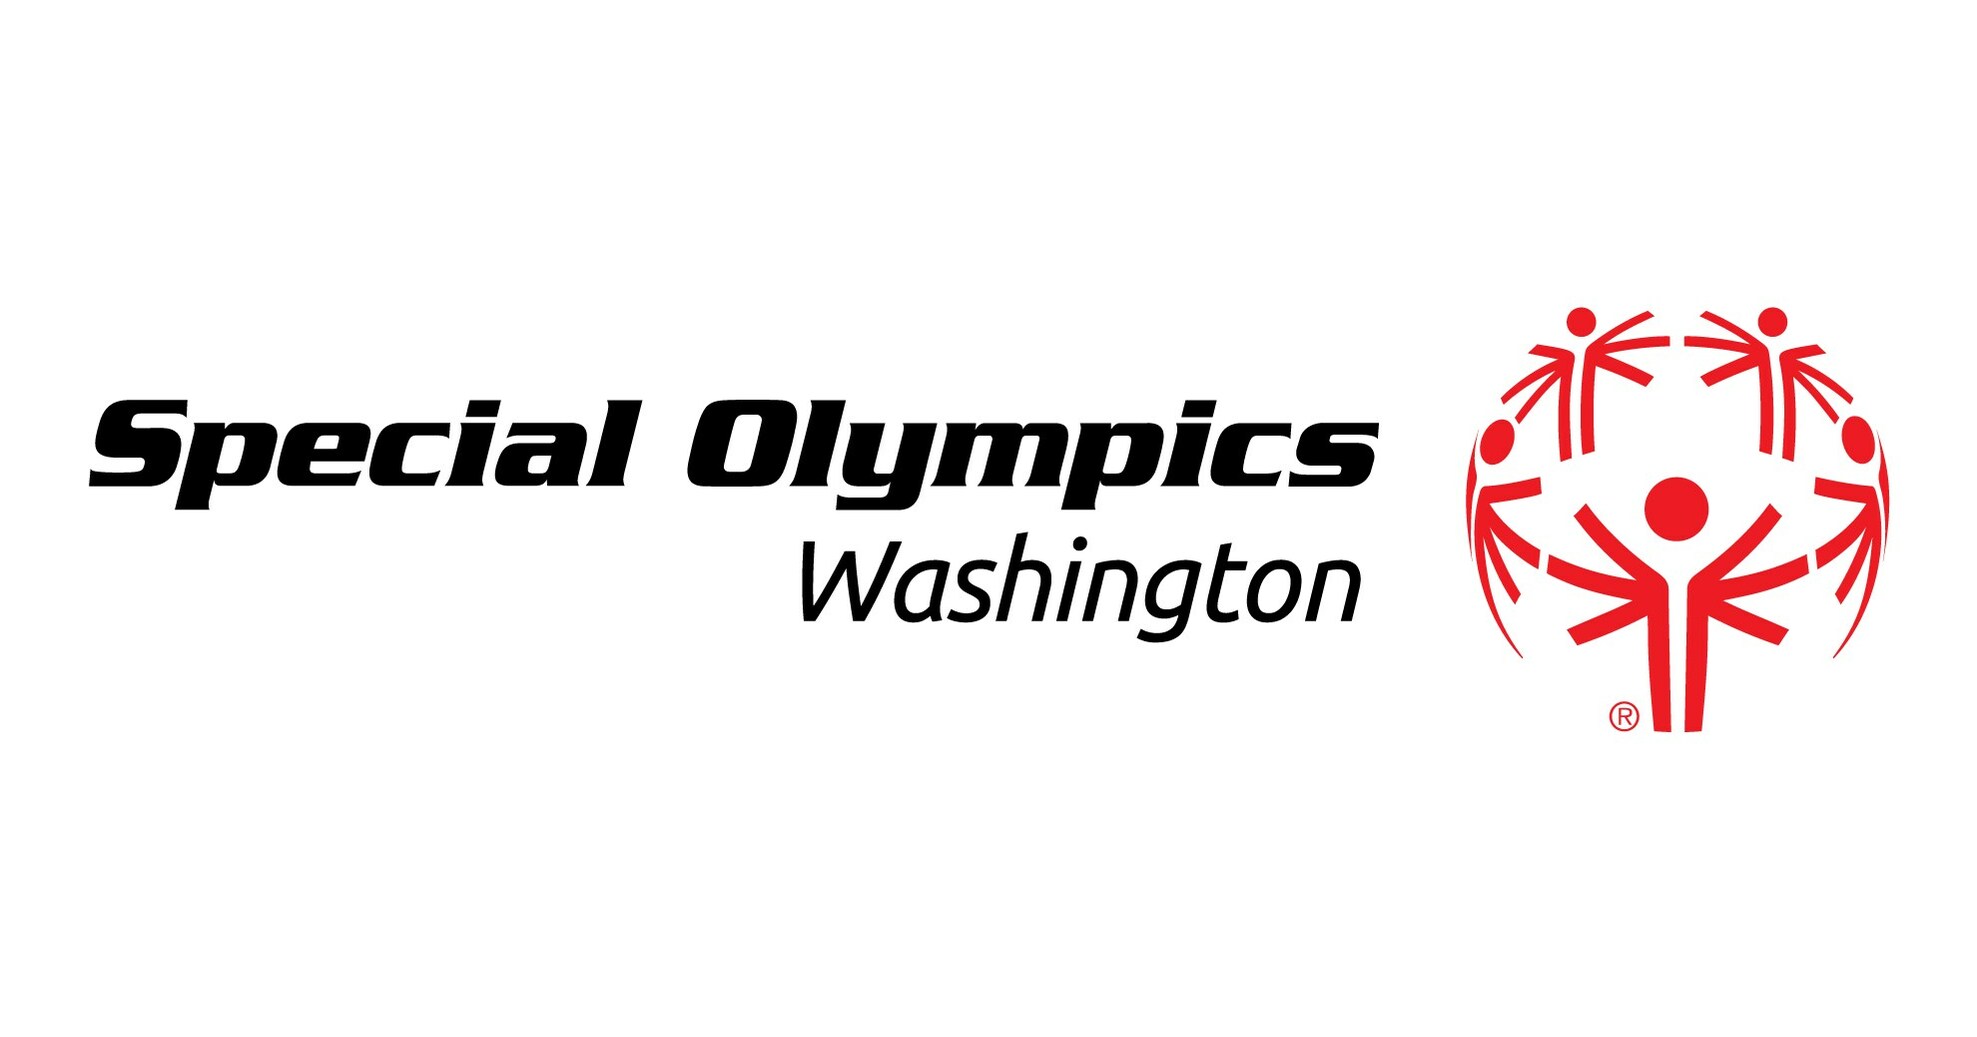 Special Olympics Washington Takes Leadership Role to Launch the Network